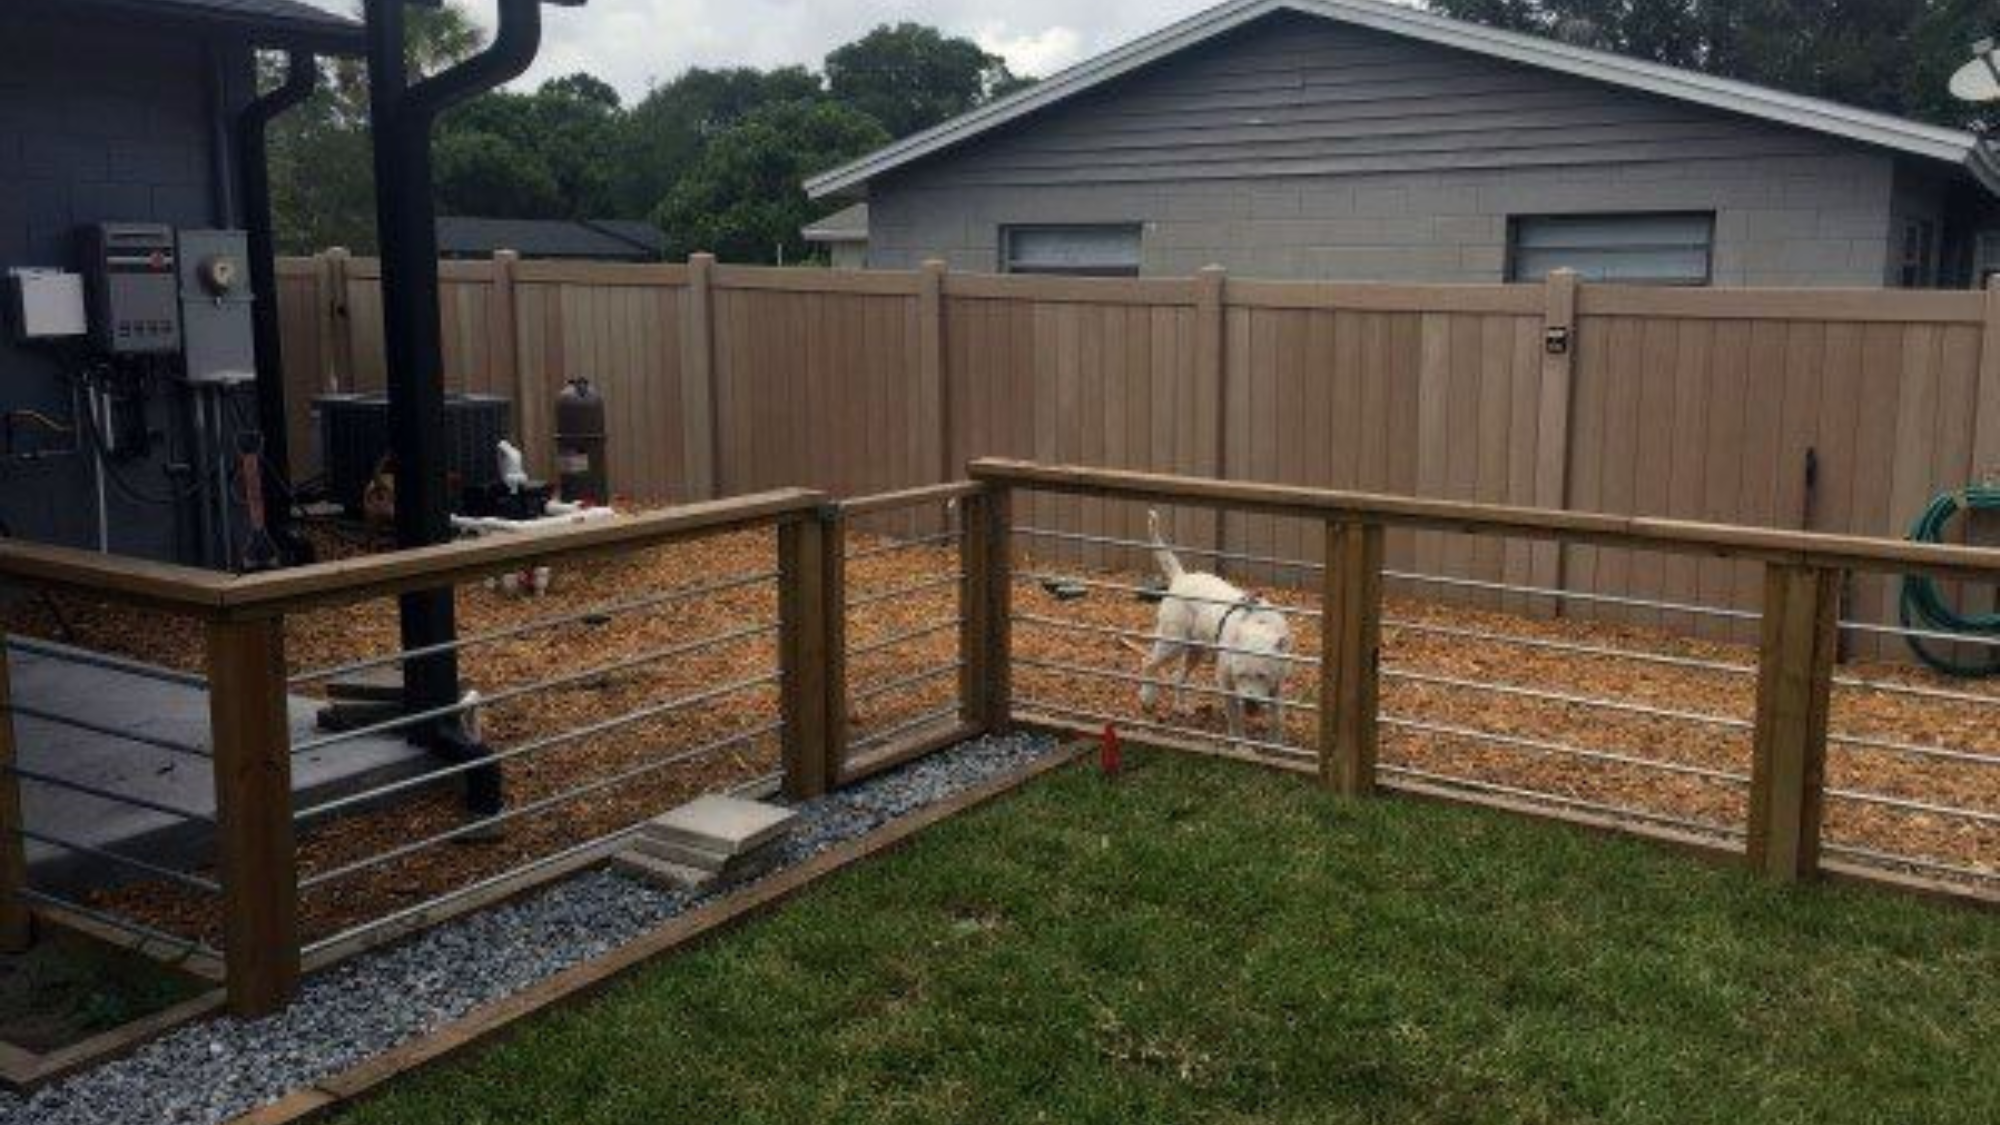 how much fenced area does a dog need